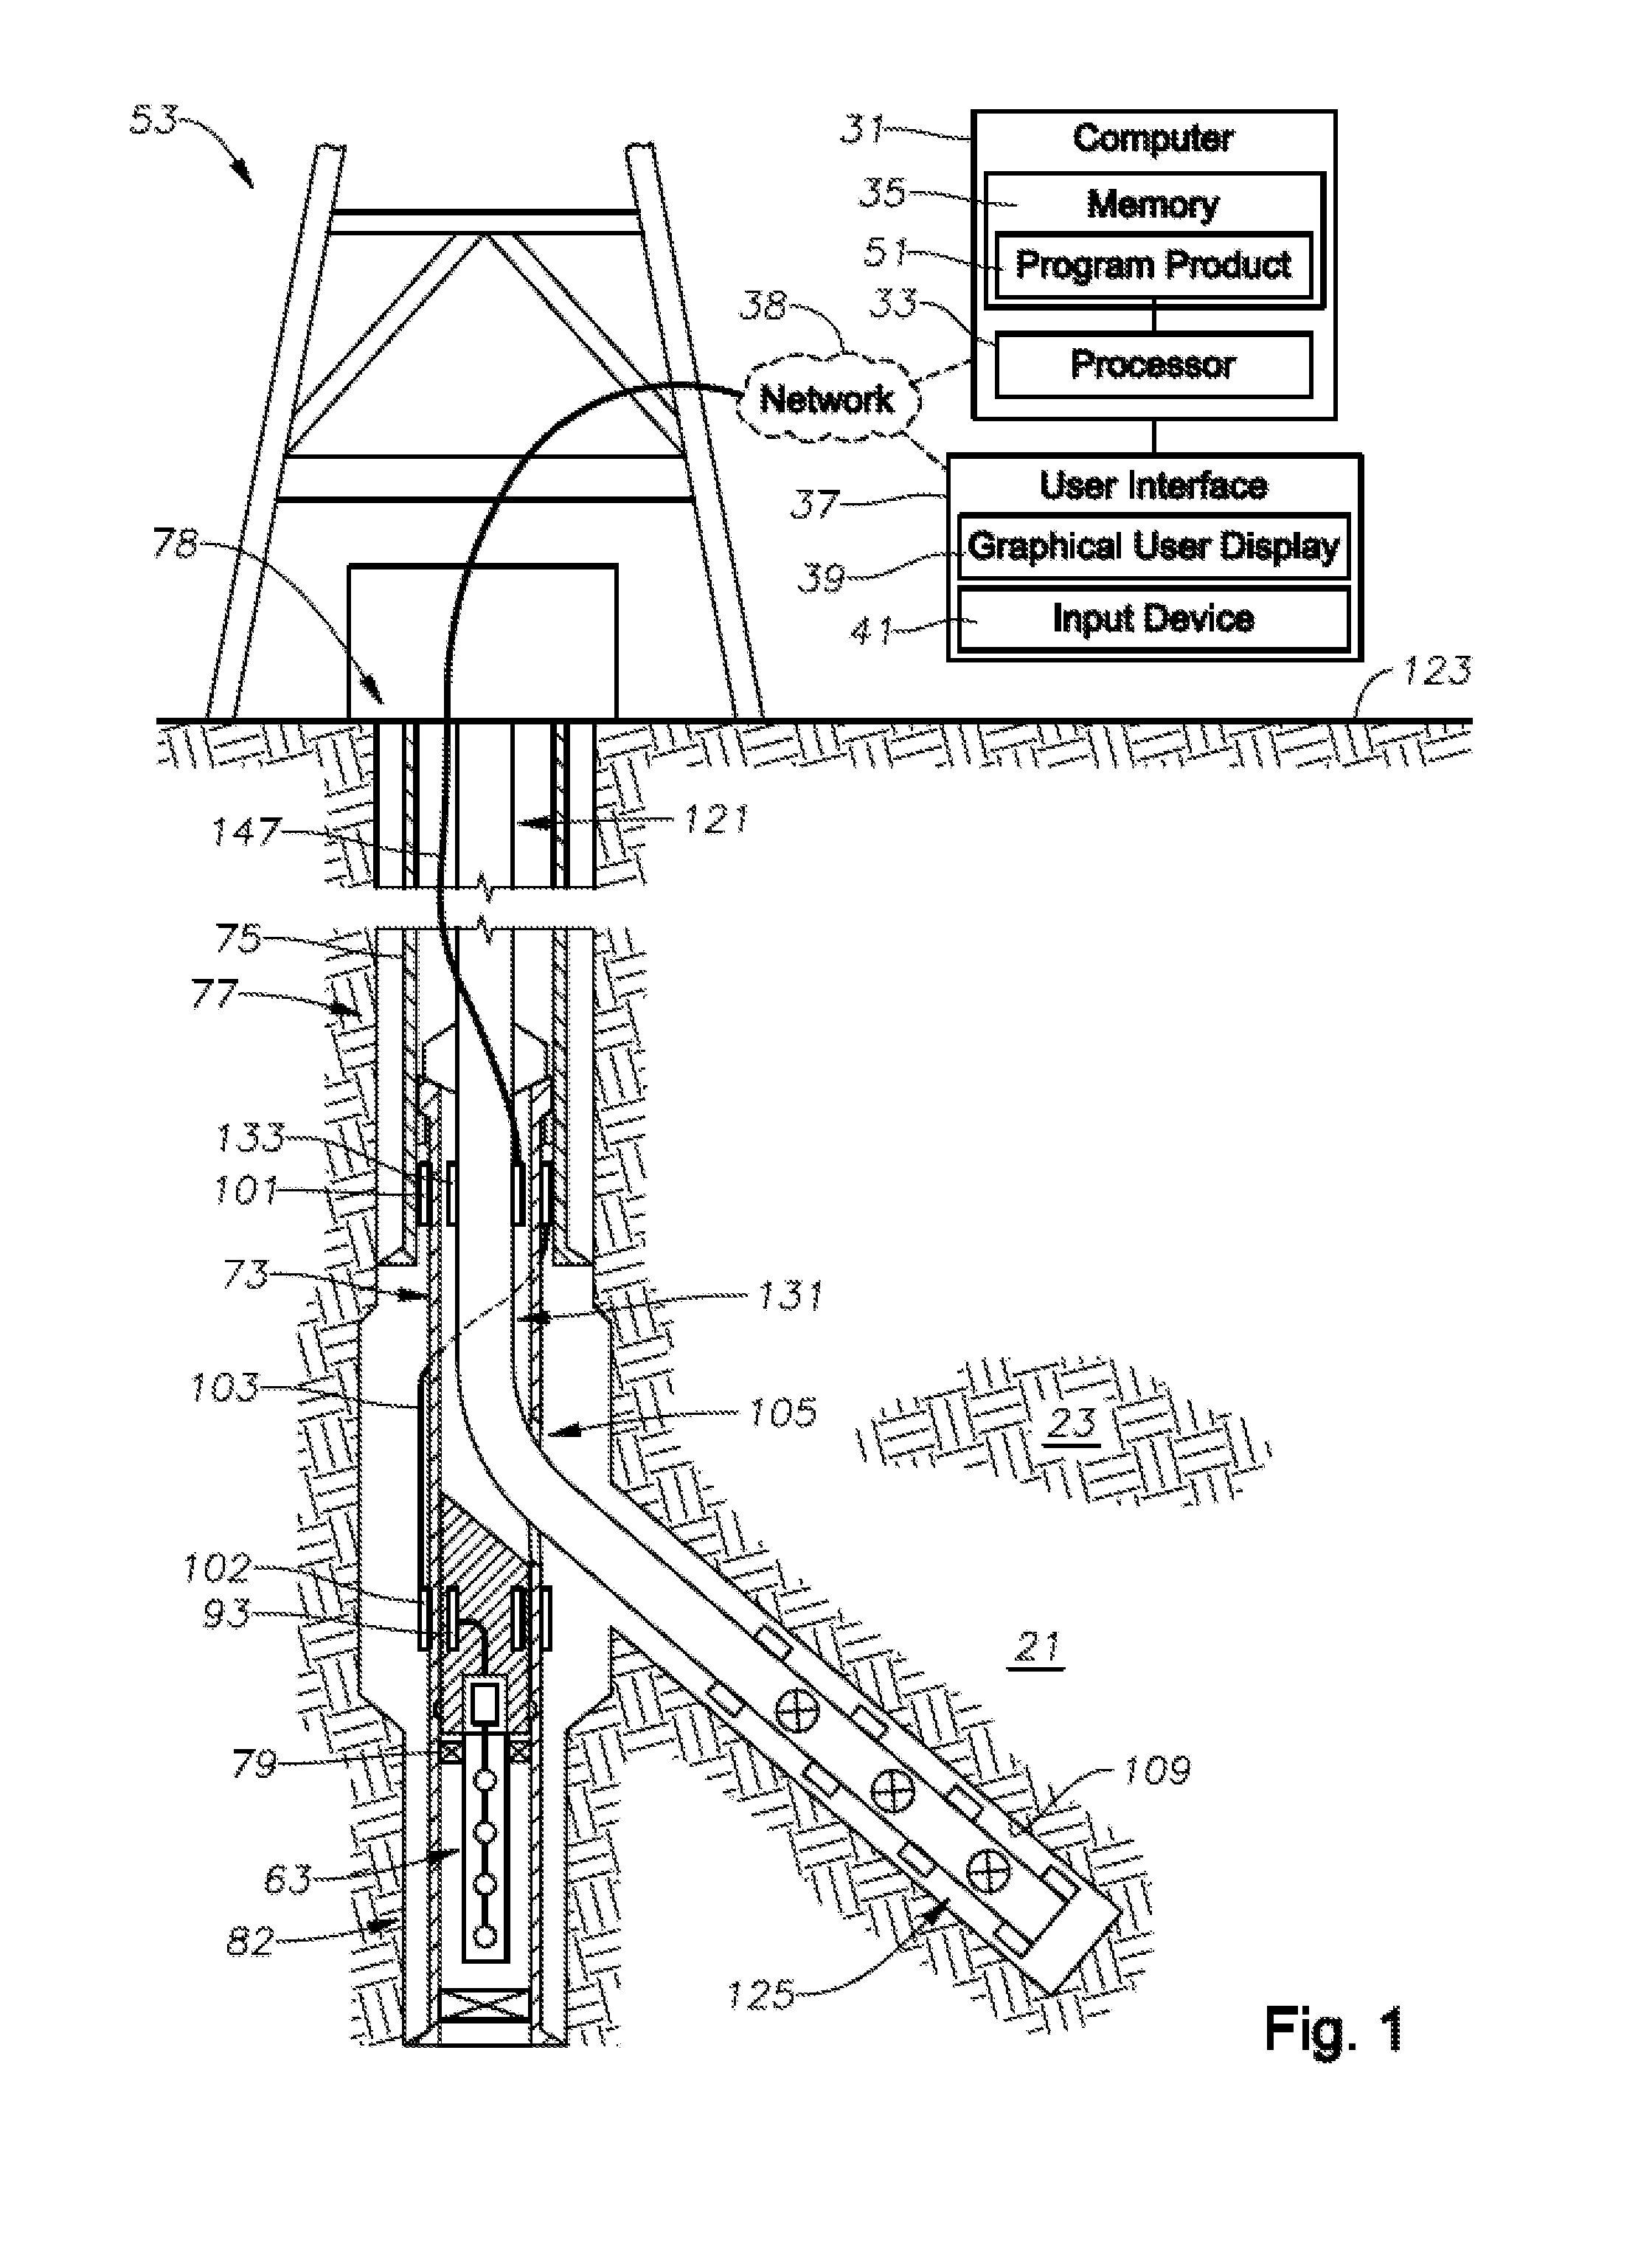 Method For Real-Time Monitoring and Transmitting Hydraulic Fracture Seismic Events to Surface Using the Pilot Hole of the Treatment Well as the Monitoring Well